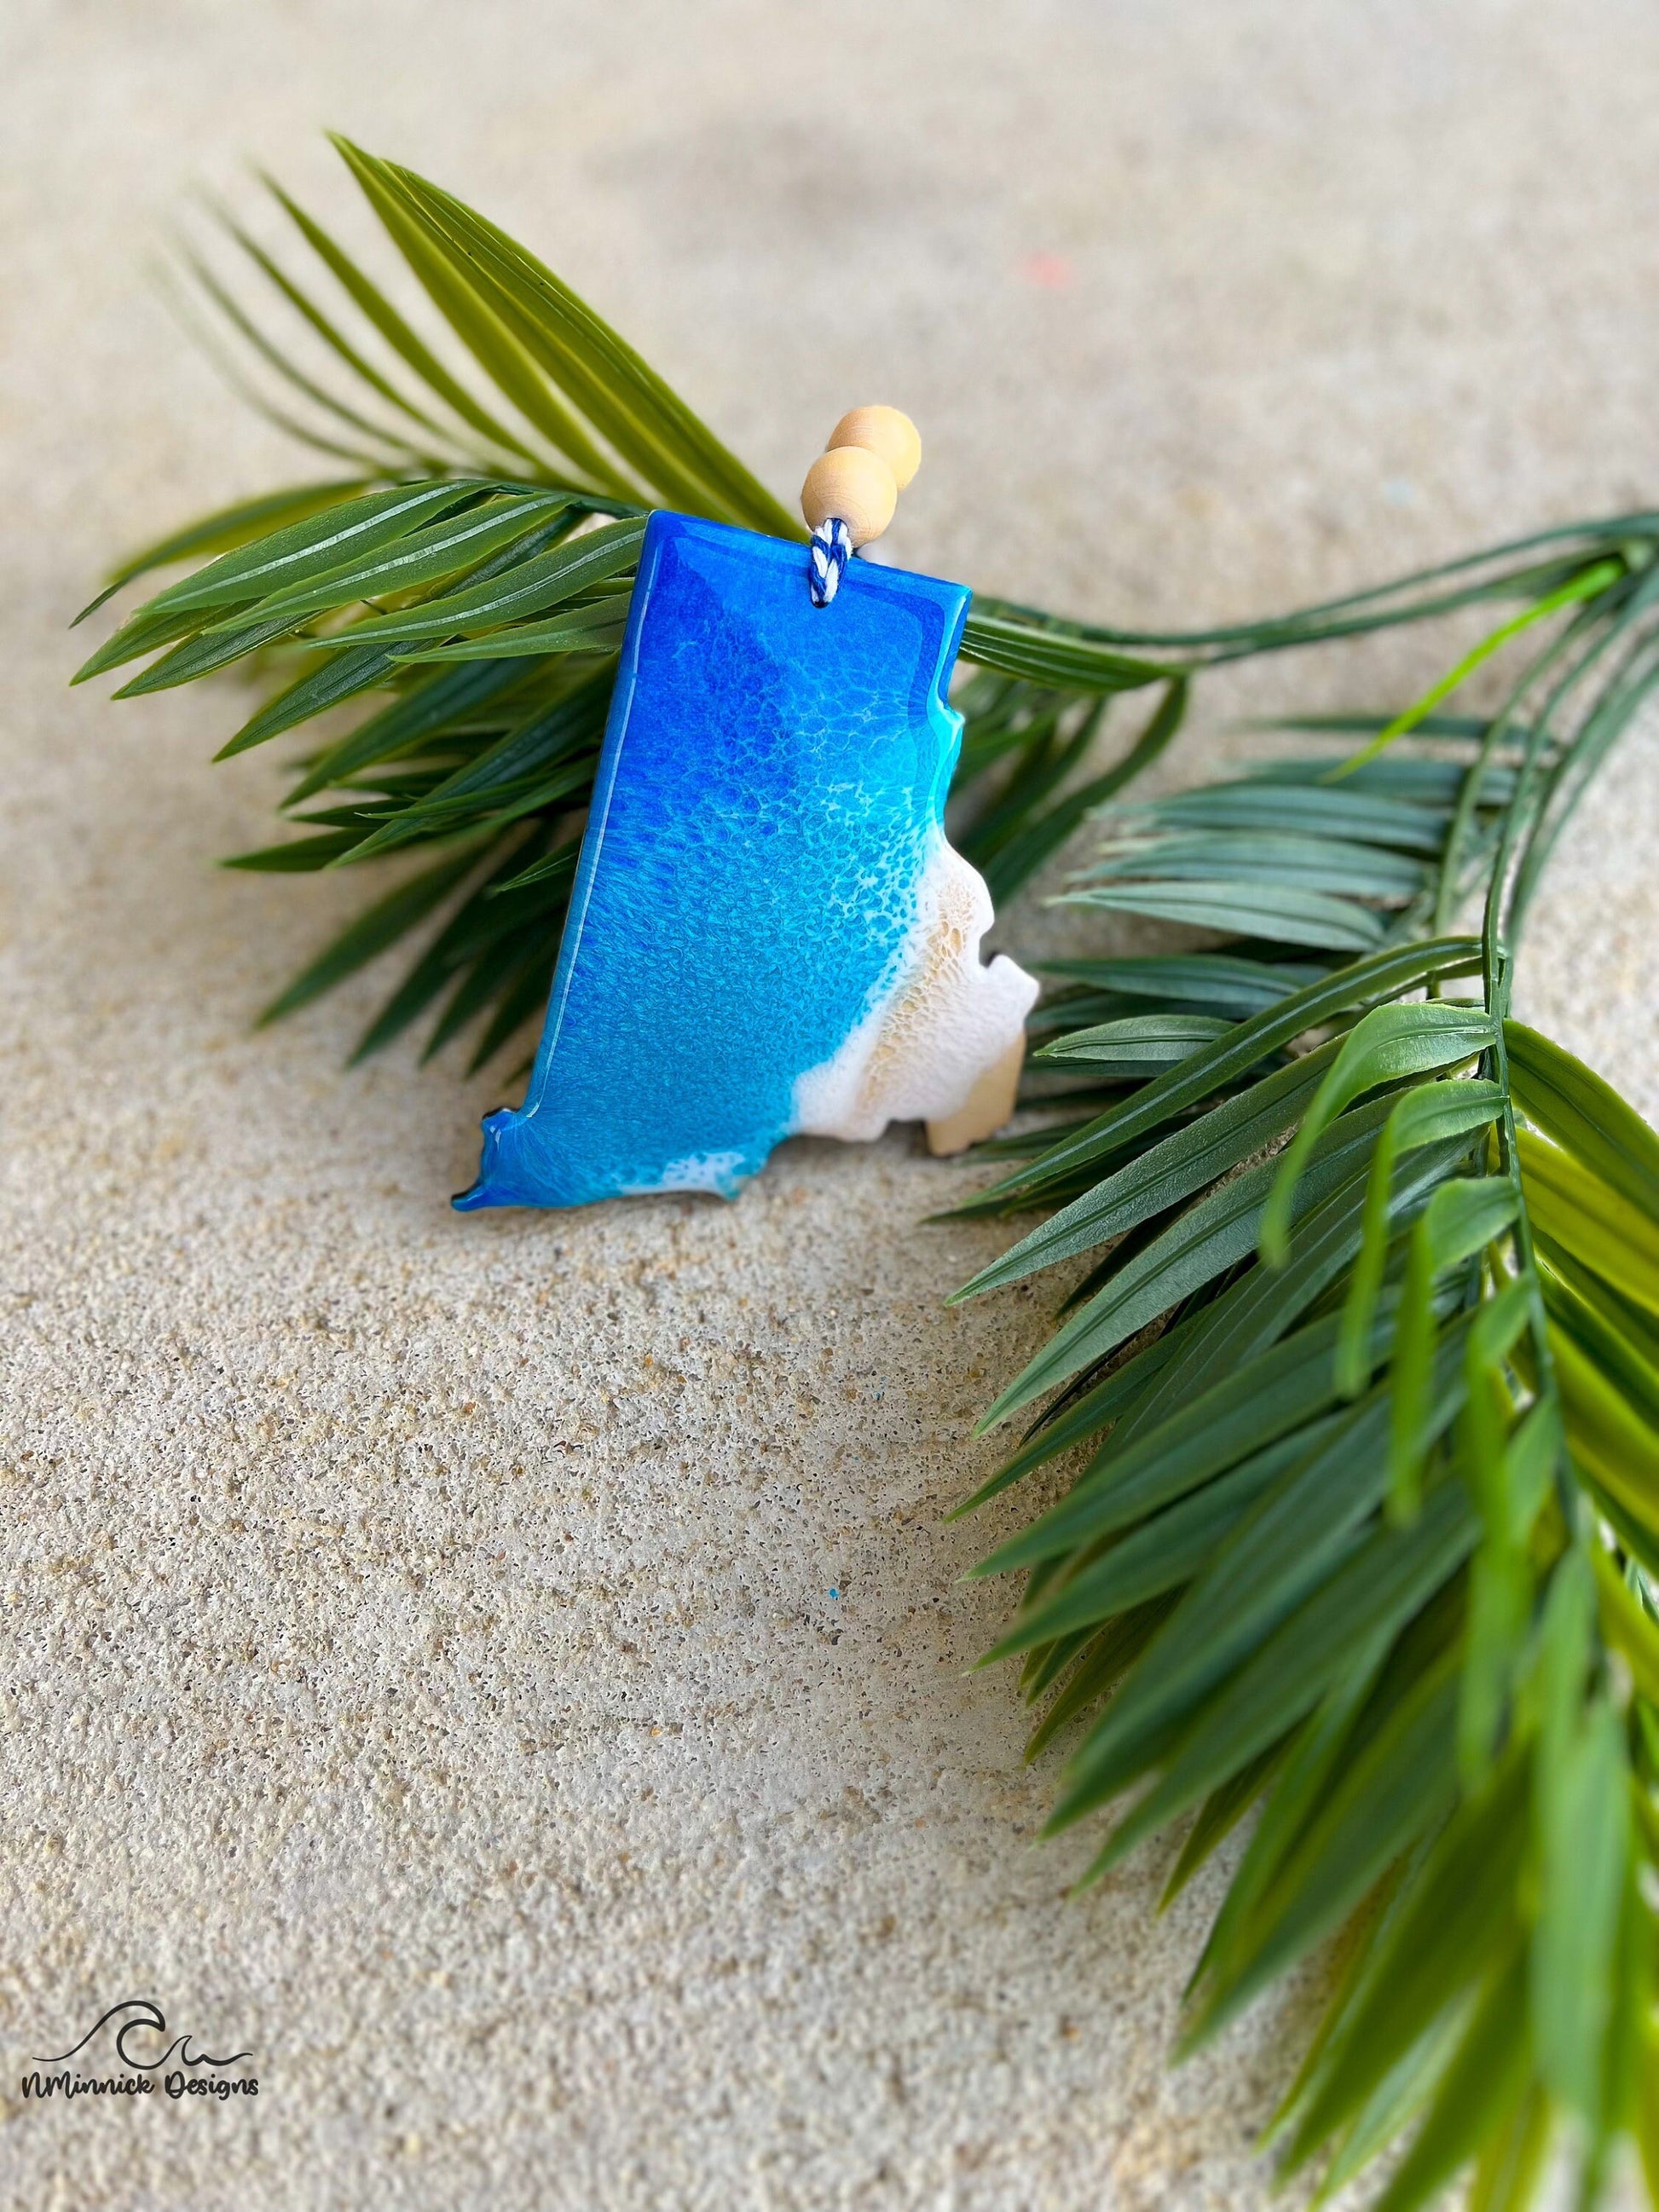 Rhode Island shaped ornament with ocean resin art laying against palm leaves.